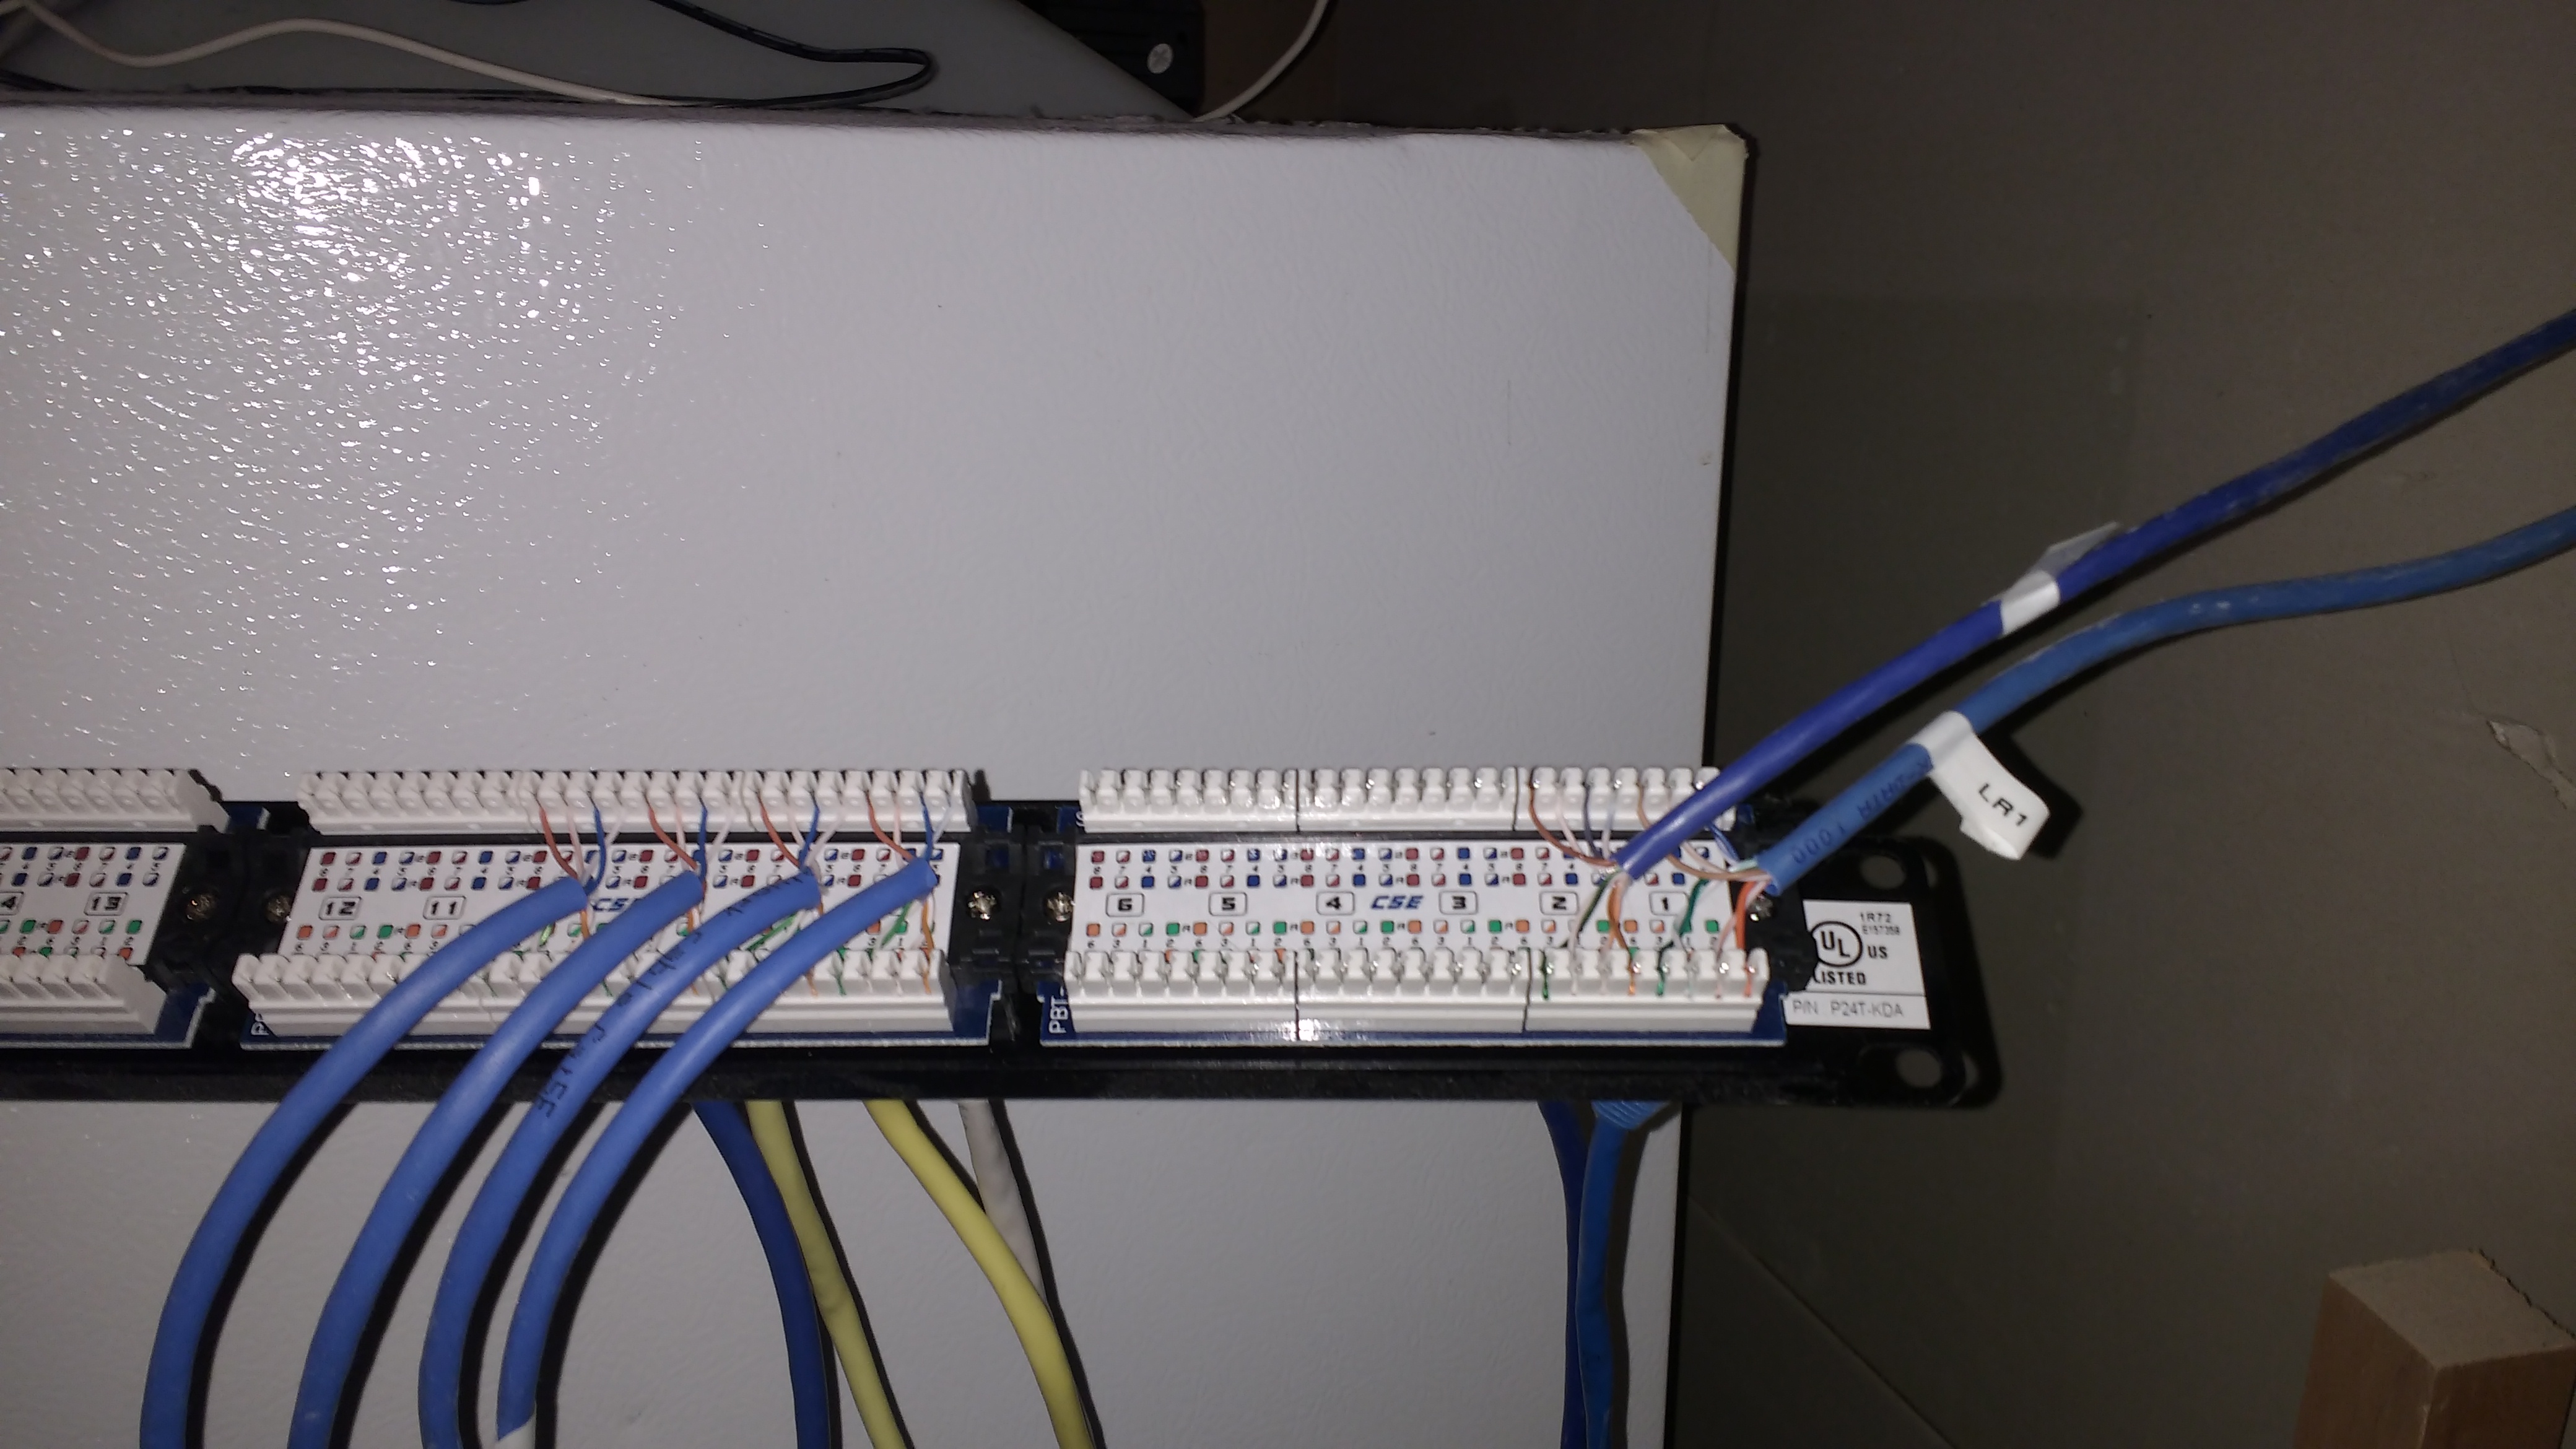 how does a patch panel work